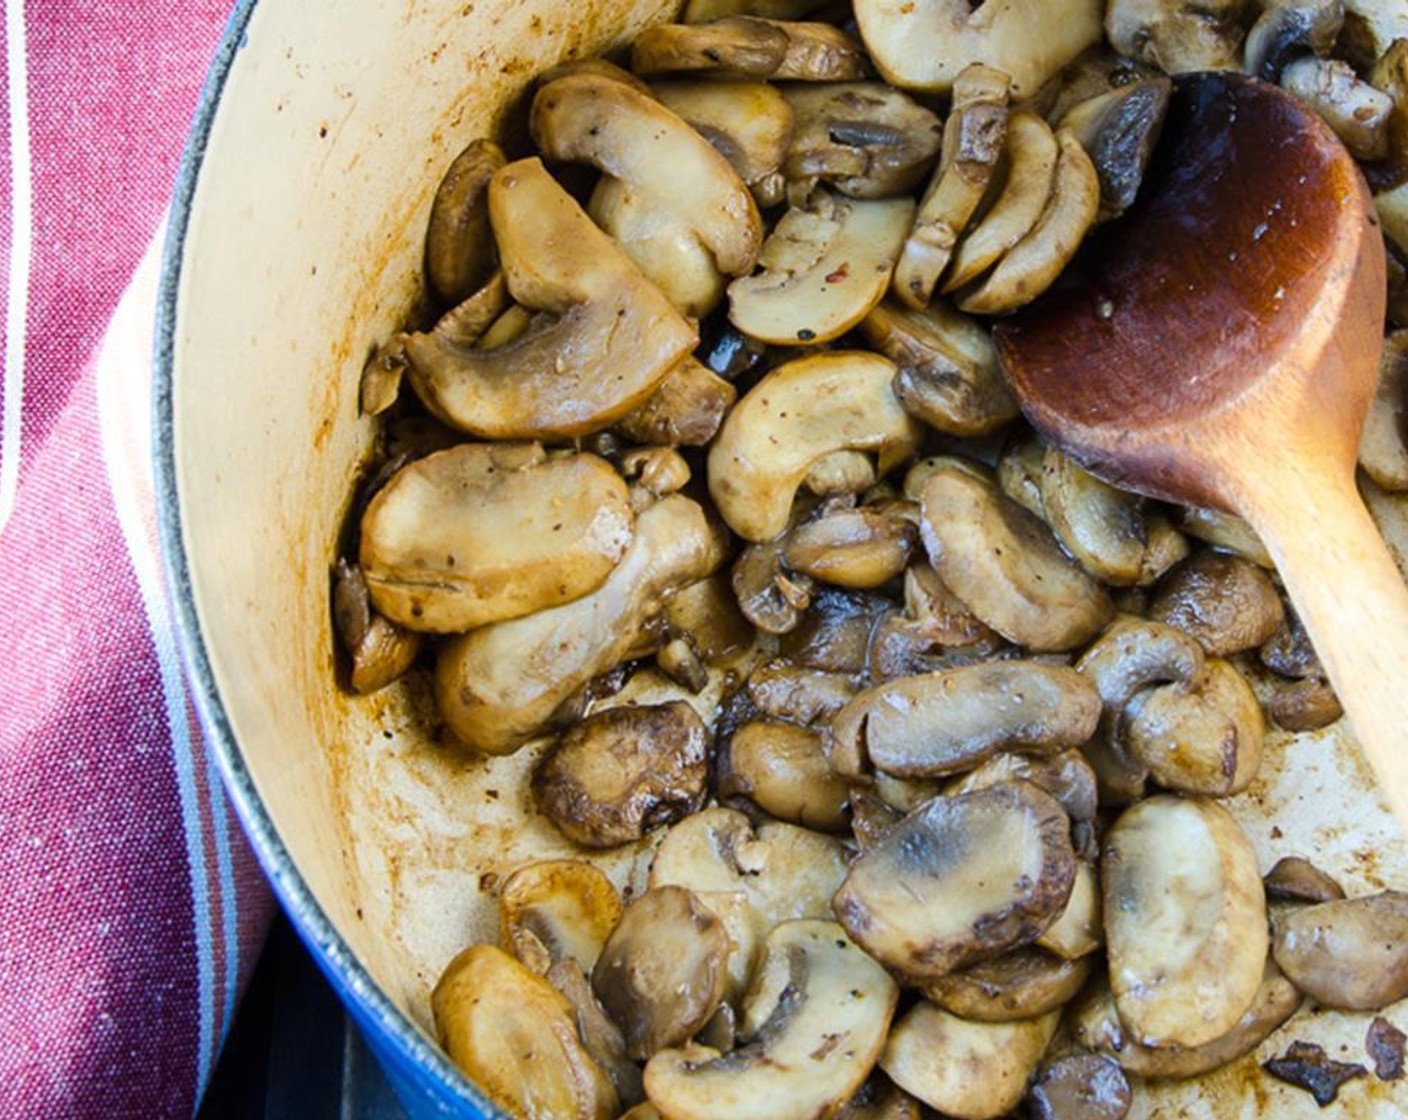 step 4 Transfer the meat to a platter and add the Button Mushrooms (4 1/2 cups) with a sprinkle of salt. Stir and place the lid on the pan until the mushrooms start to give up their liquid. Cook for 5 to 8 minutes, stirring occasionally